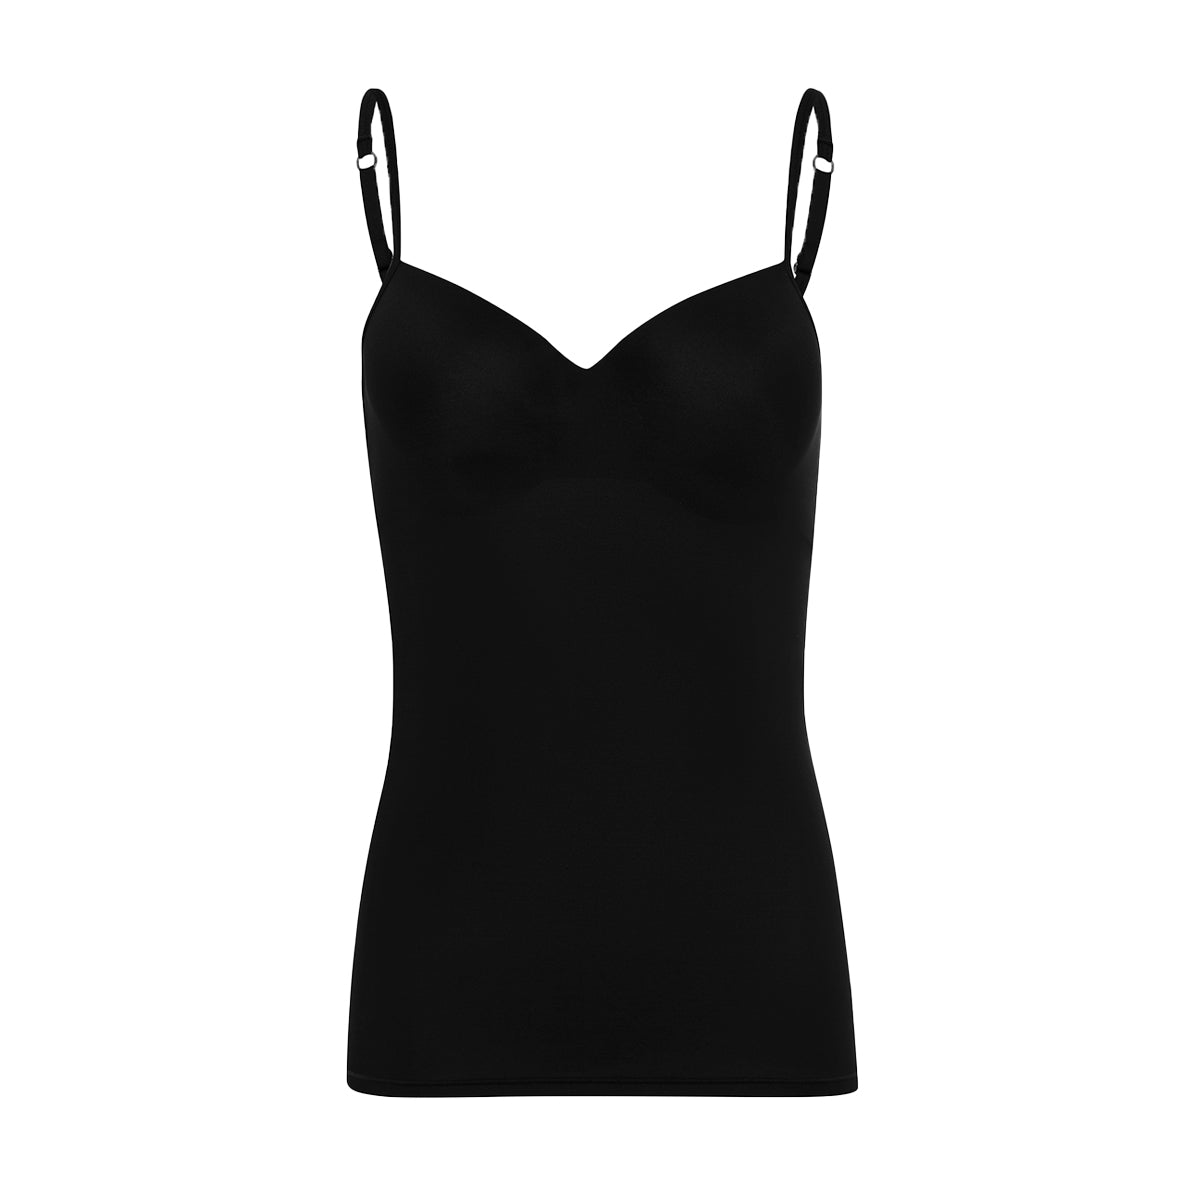 Singlet Camisole with Cutaway Lace (Black or White) – Not Just Bras